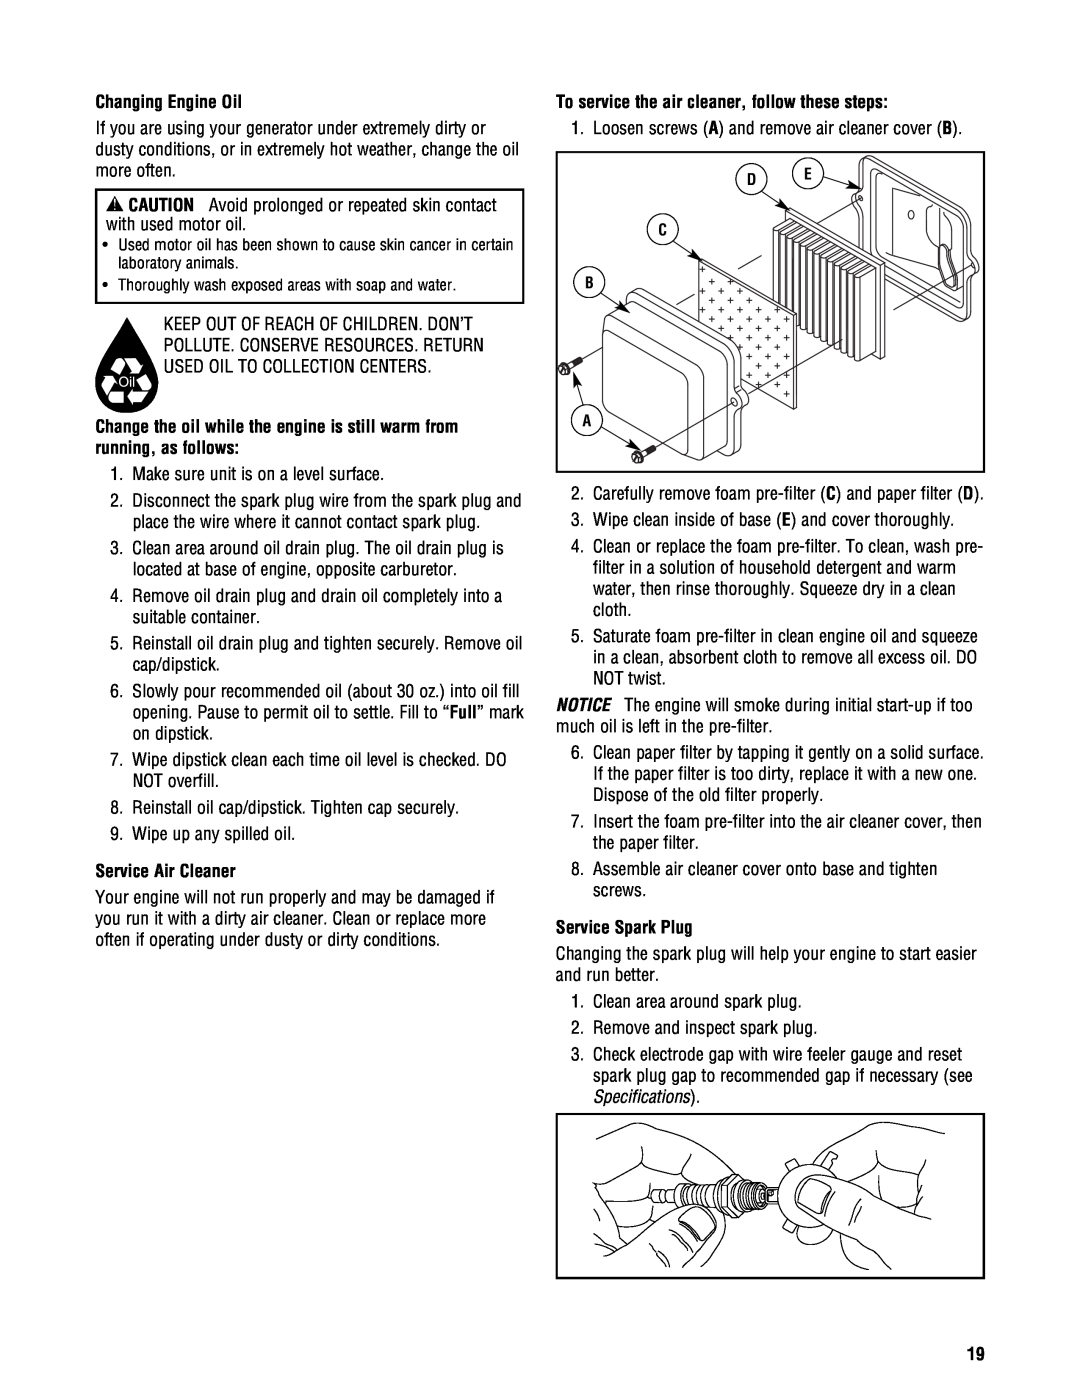 Briggs & Stratton PRO4000 manual Changing Engine Oil, Service Air Cleaner, To service the air cleaner, follow these steps 